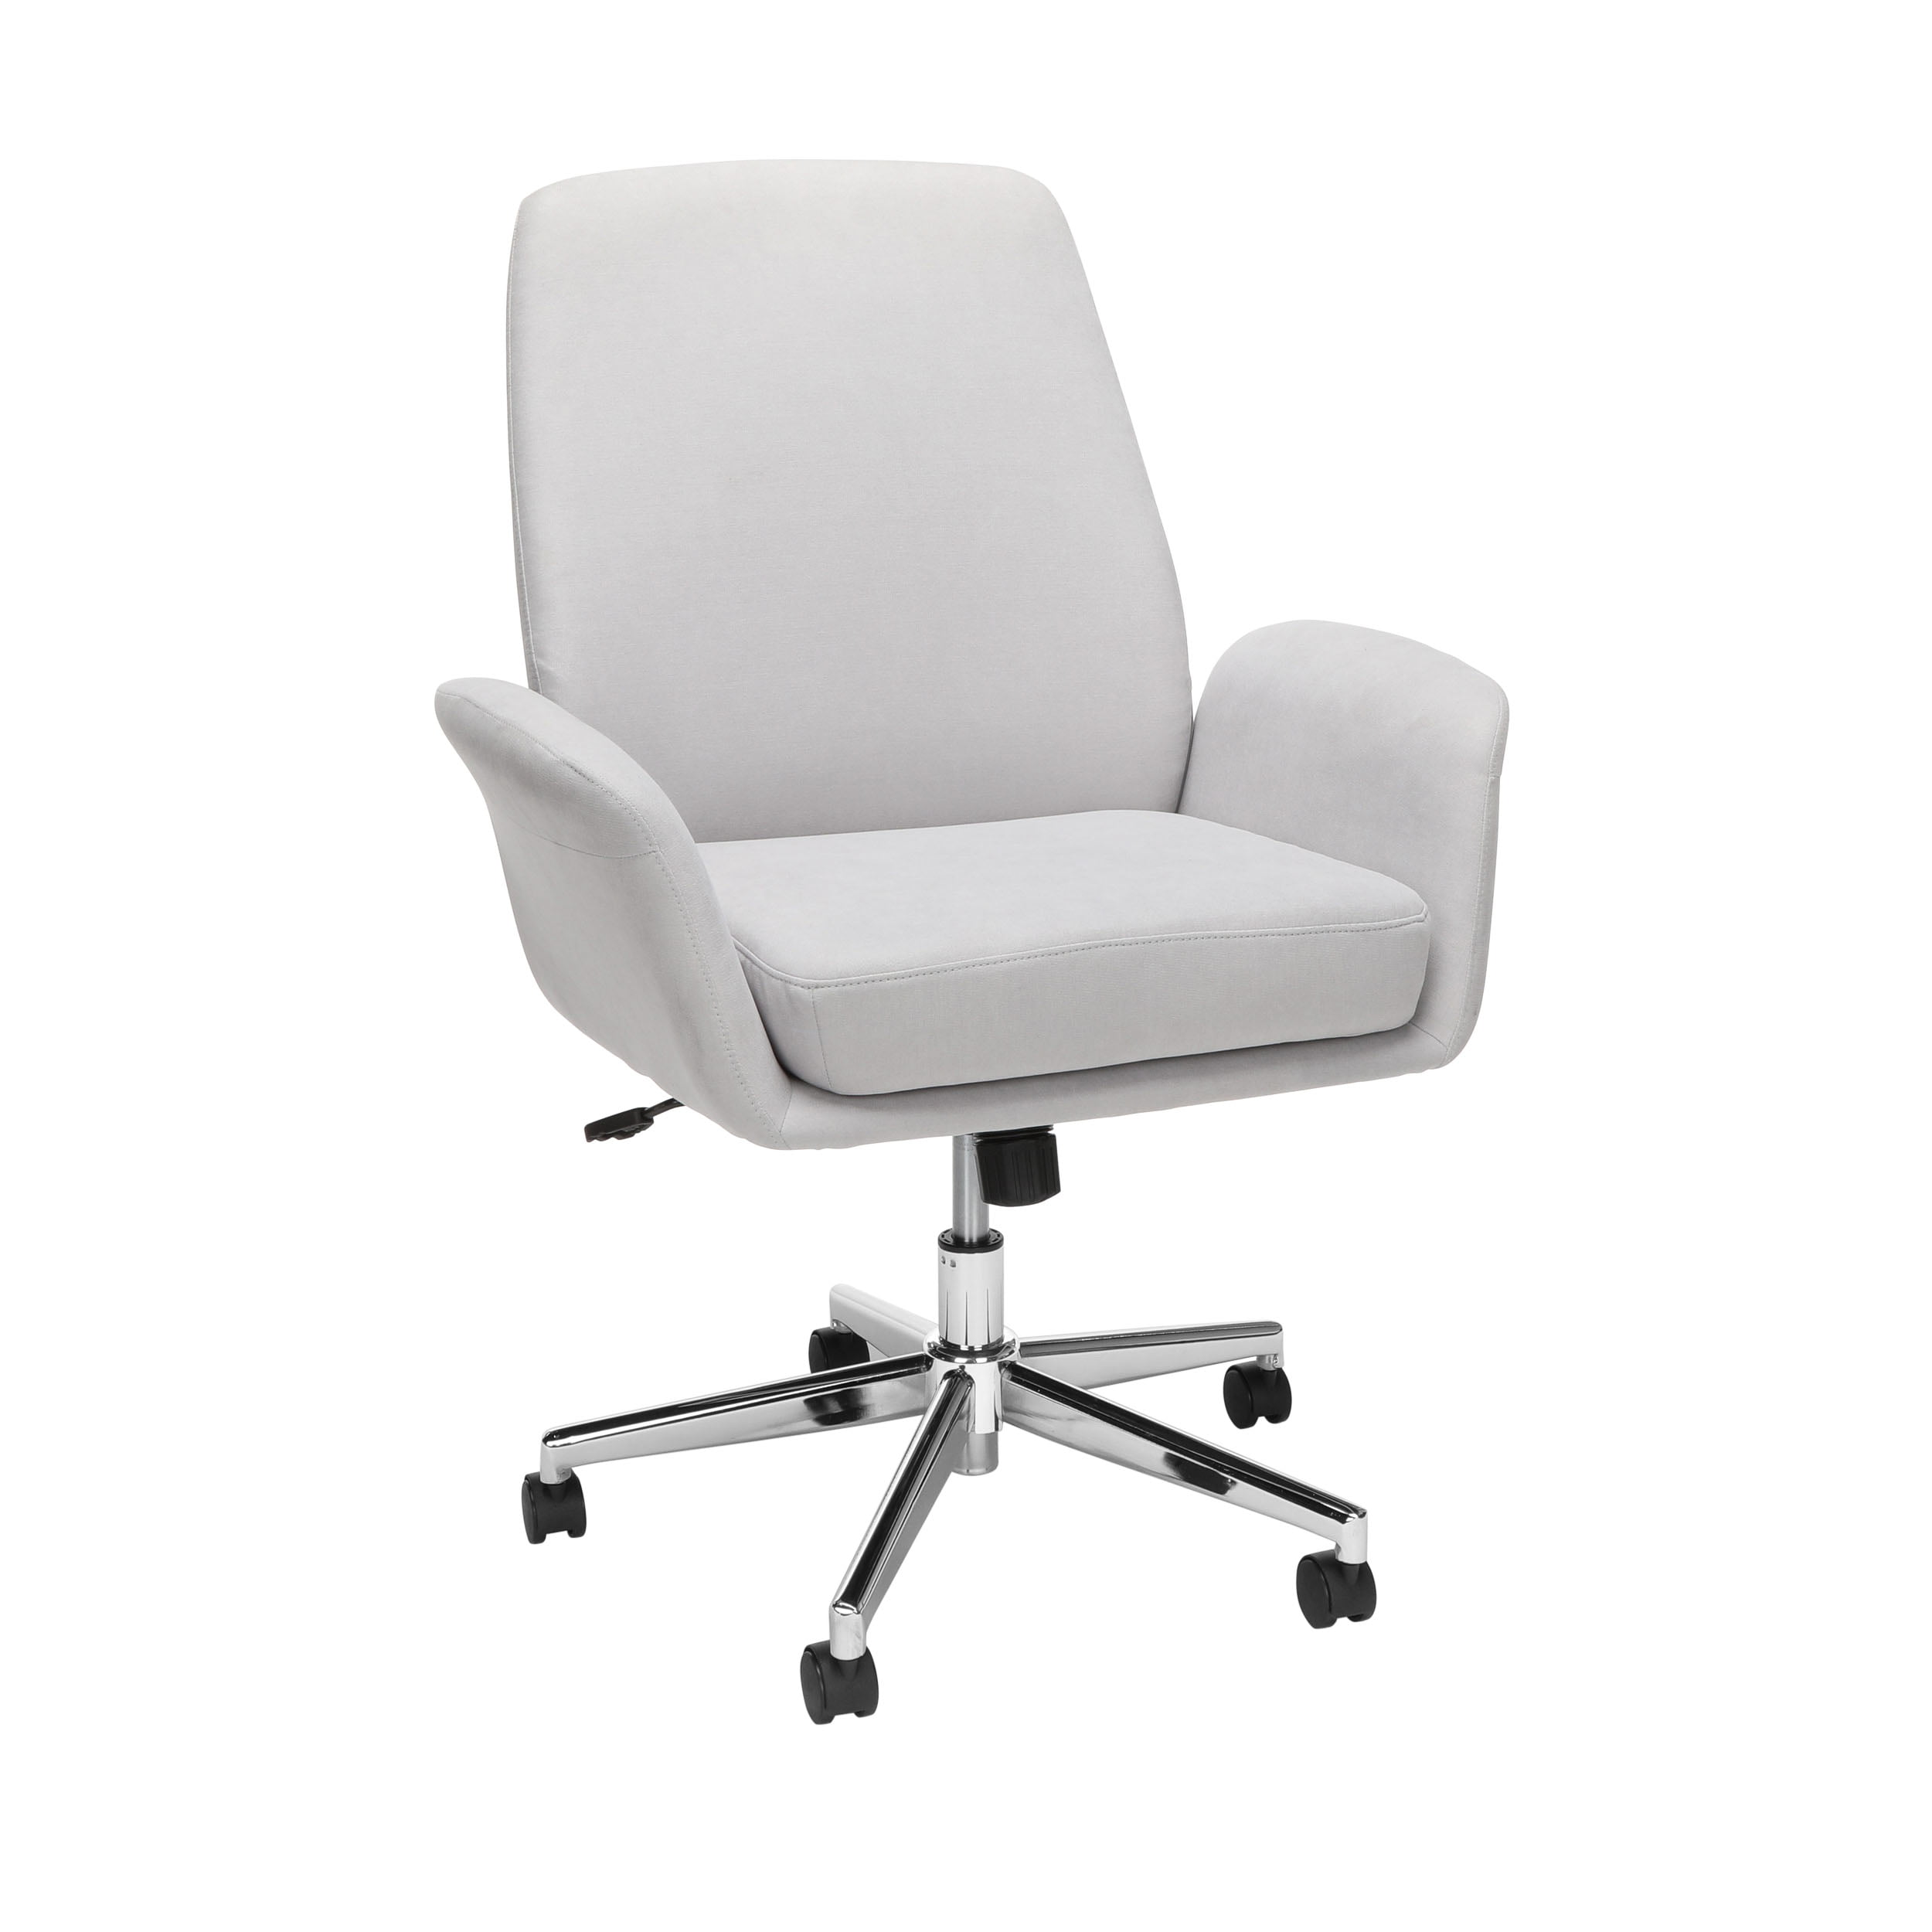 Ofm Modern Fabric Upholstered Office, Upholstered Desk Chair With Arms